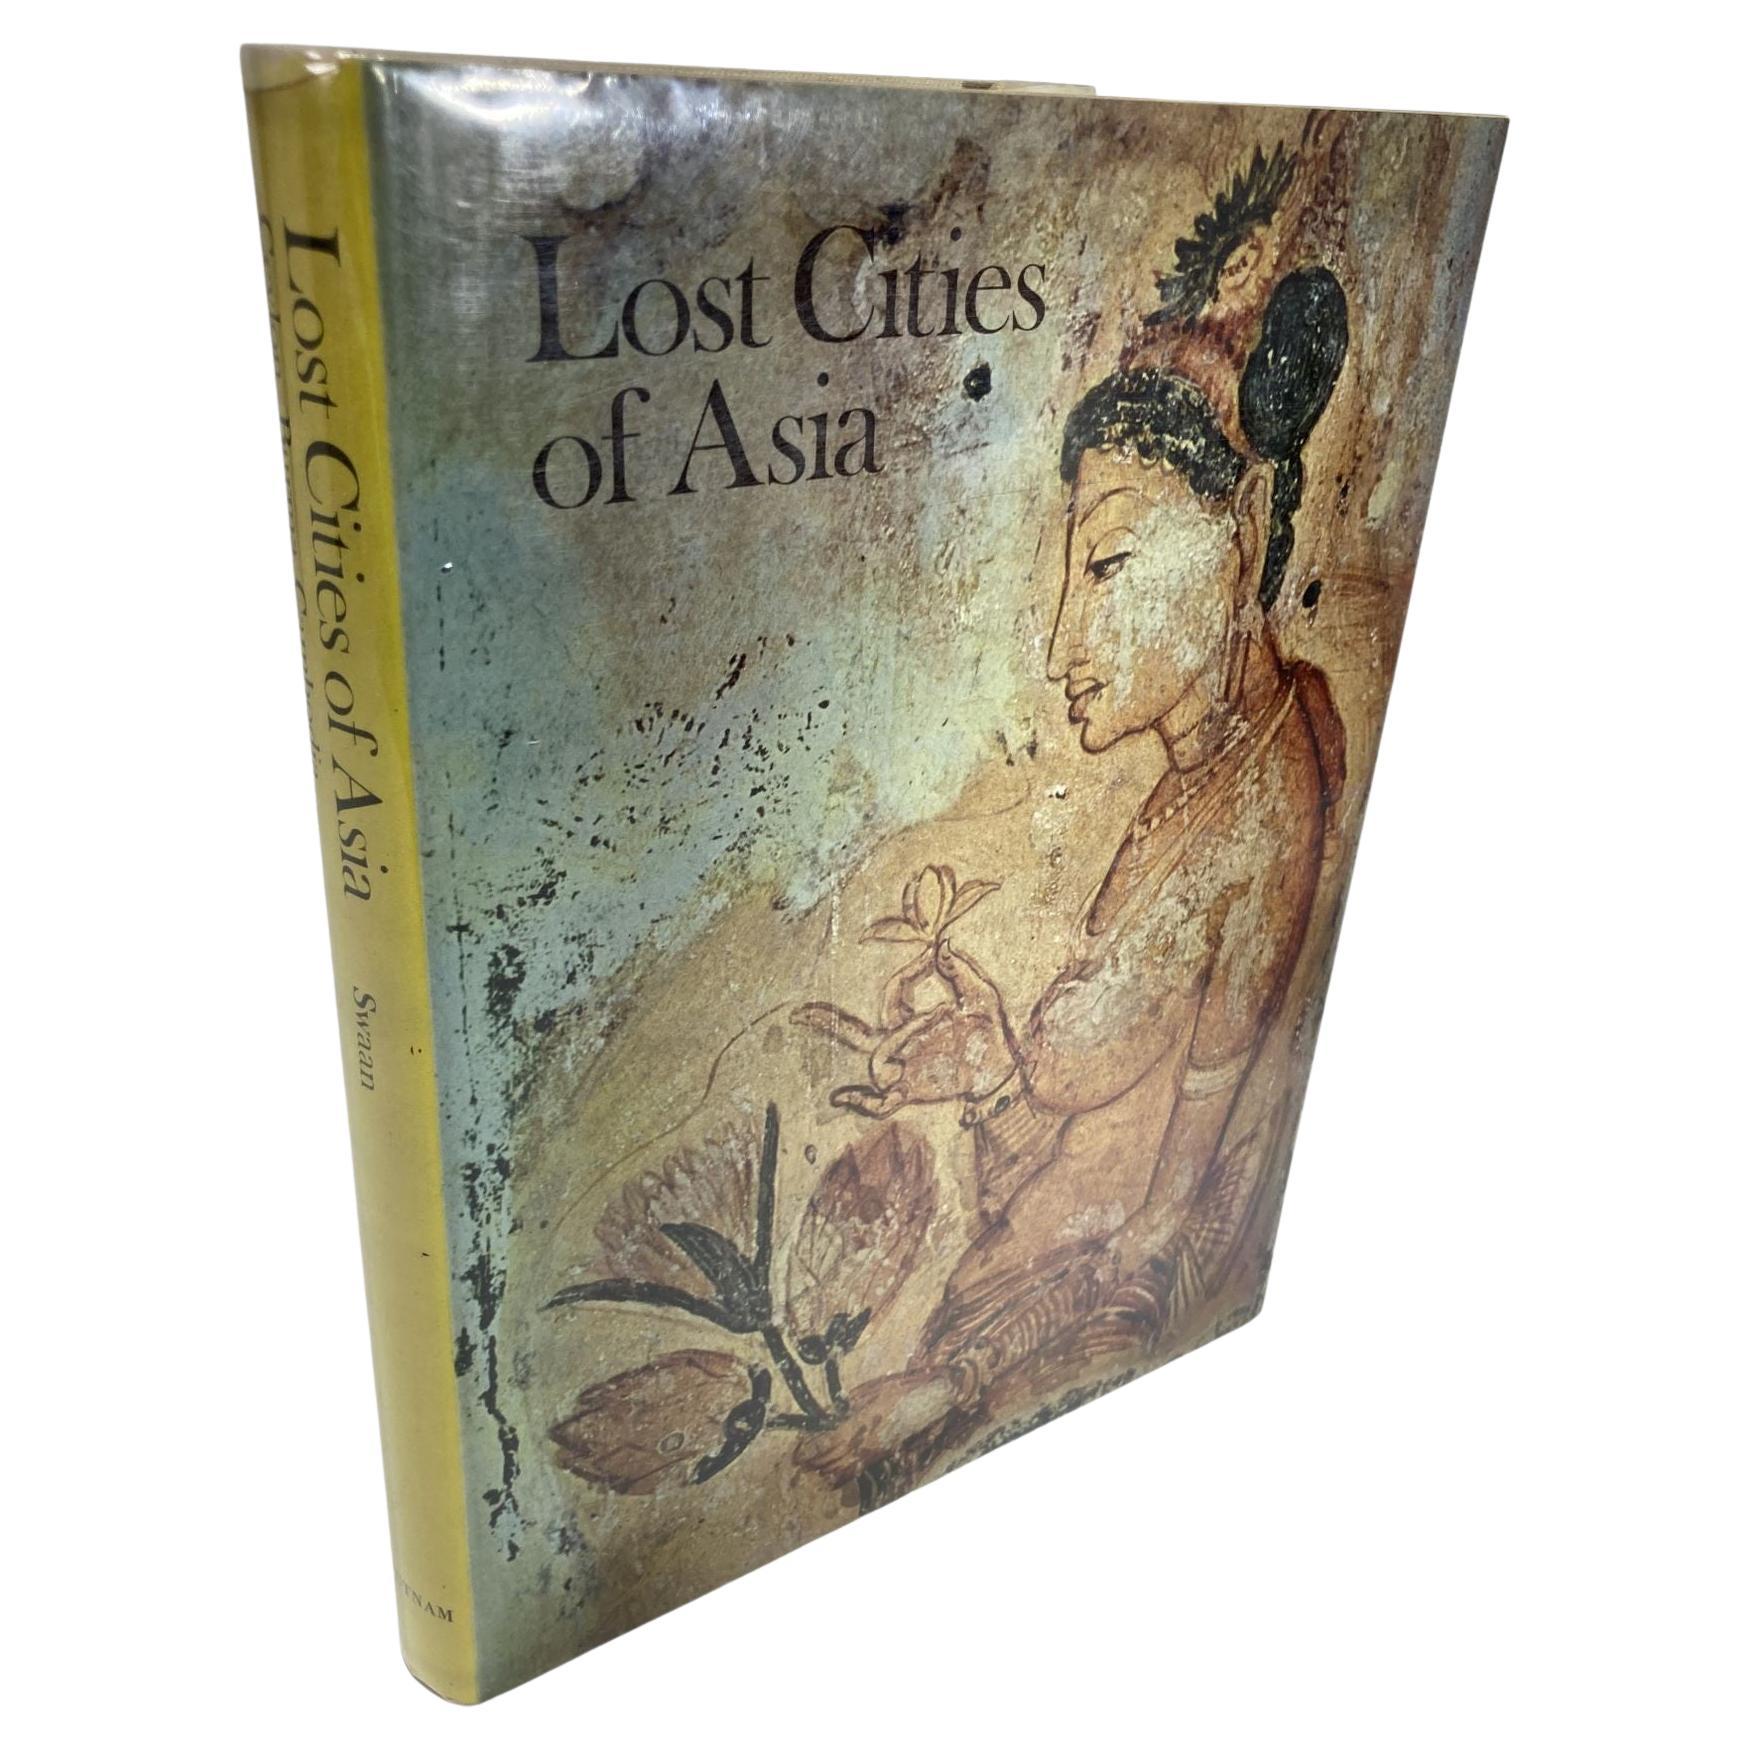 Lost Cities of Asia Hardcover Book 1st Edition 1966 by Wim Swaan